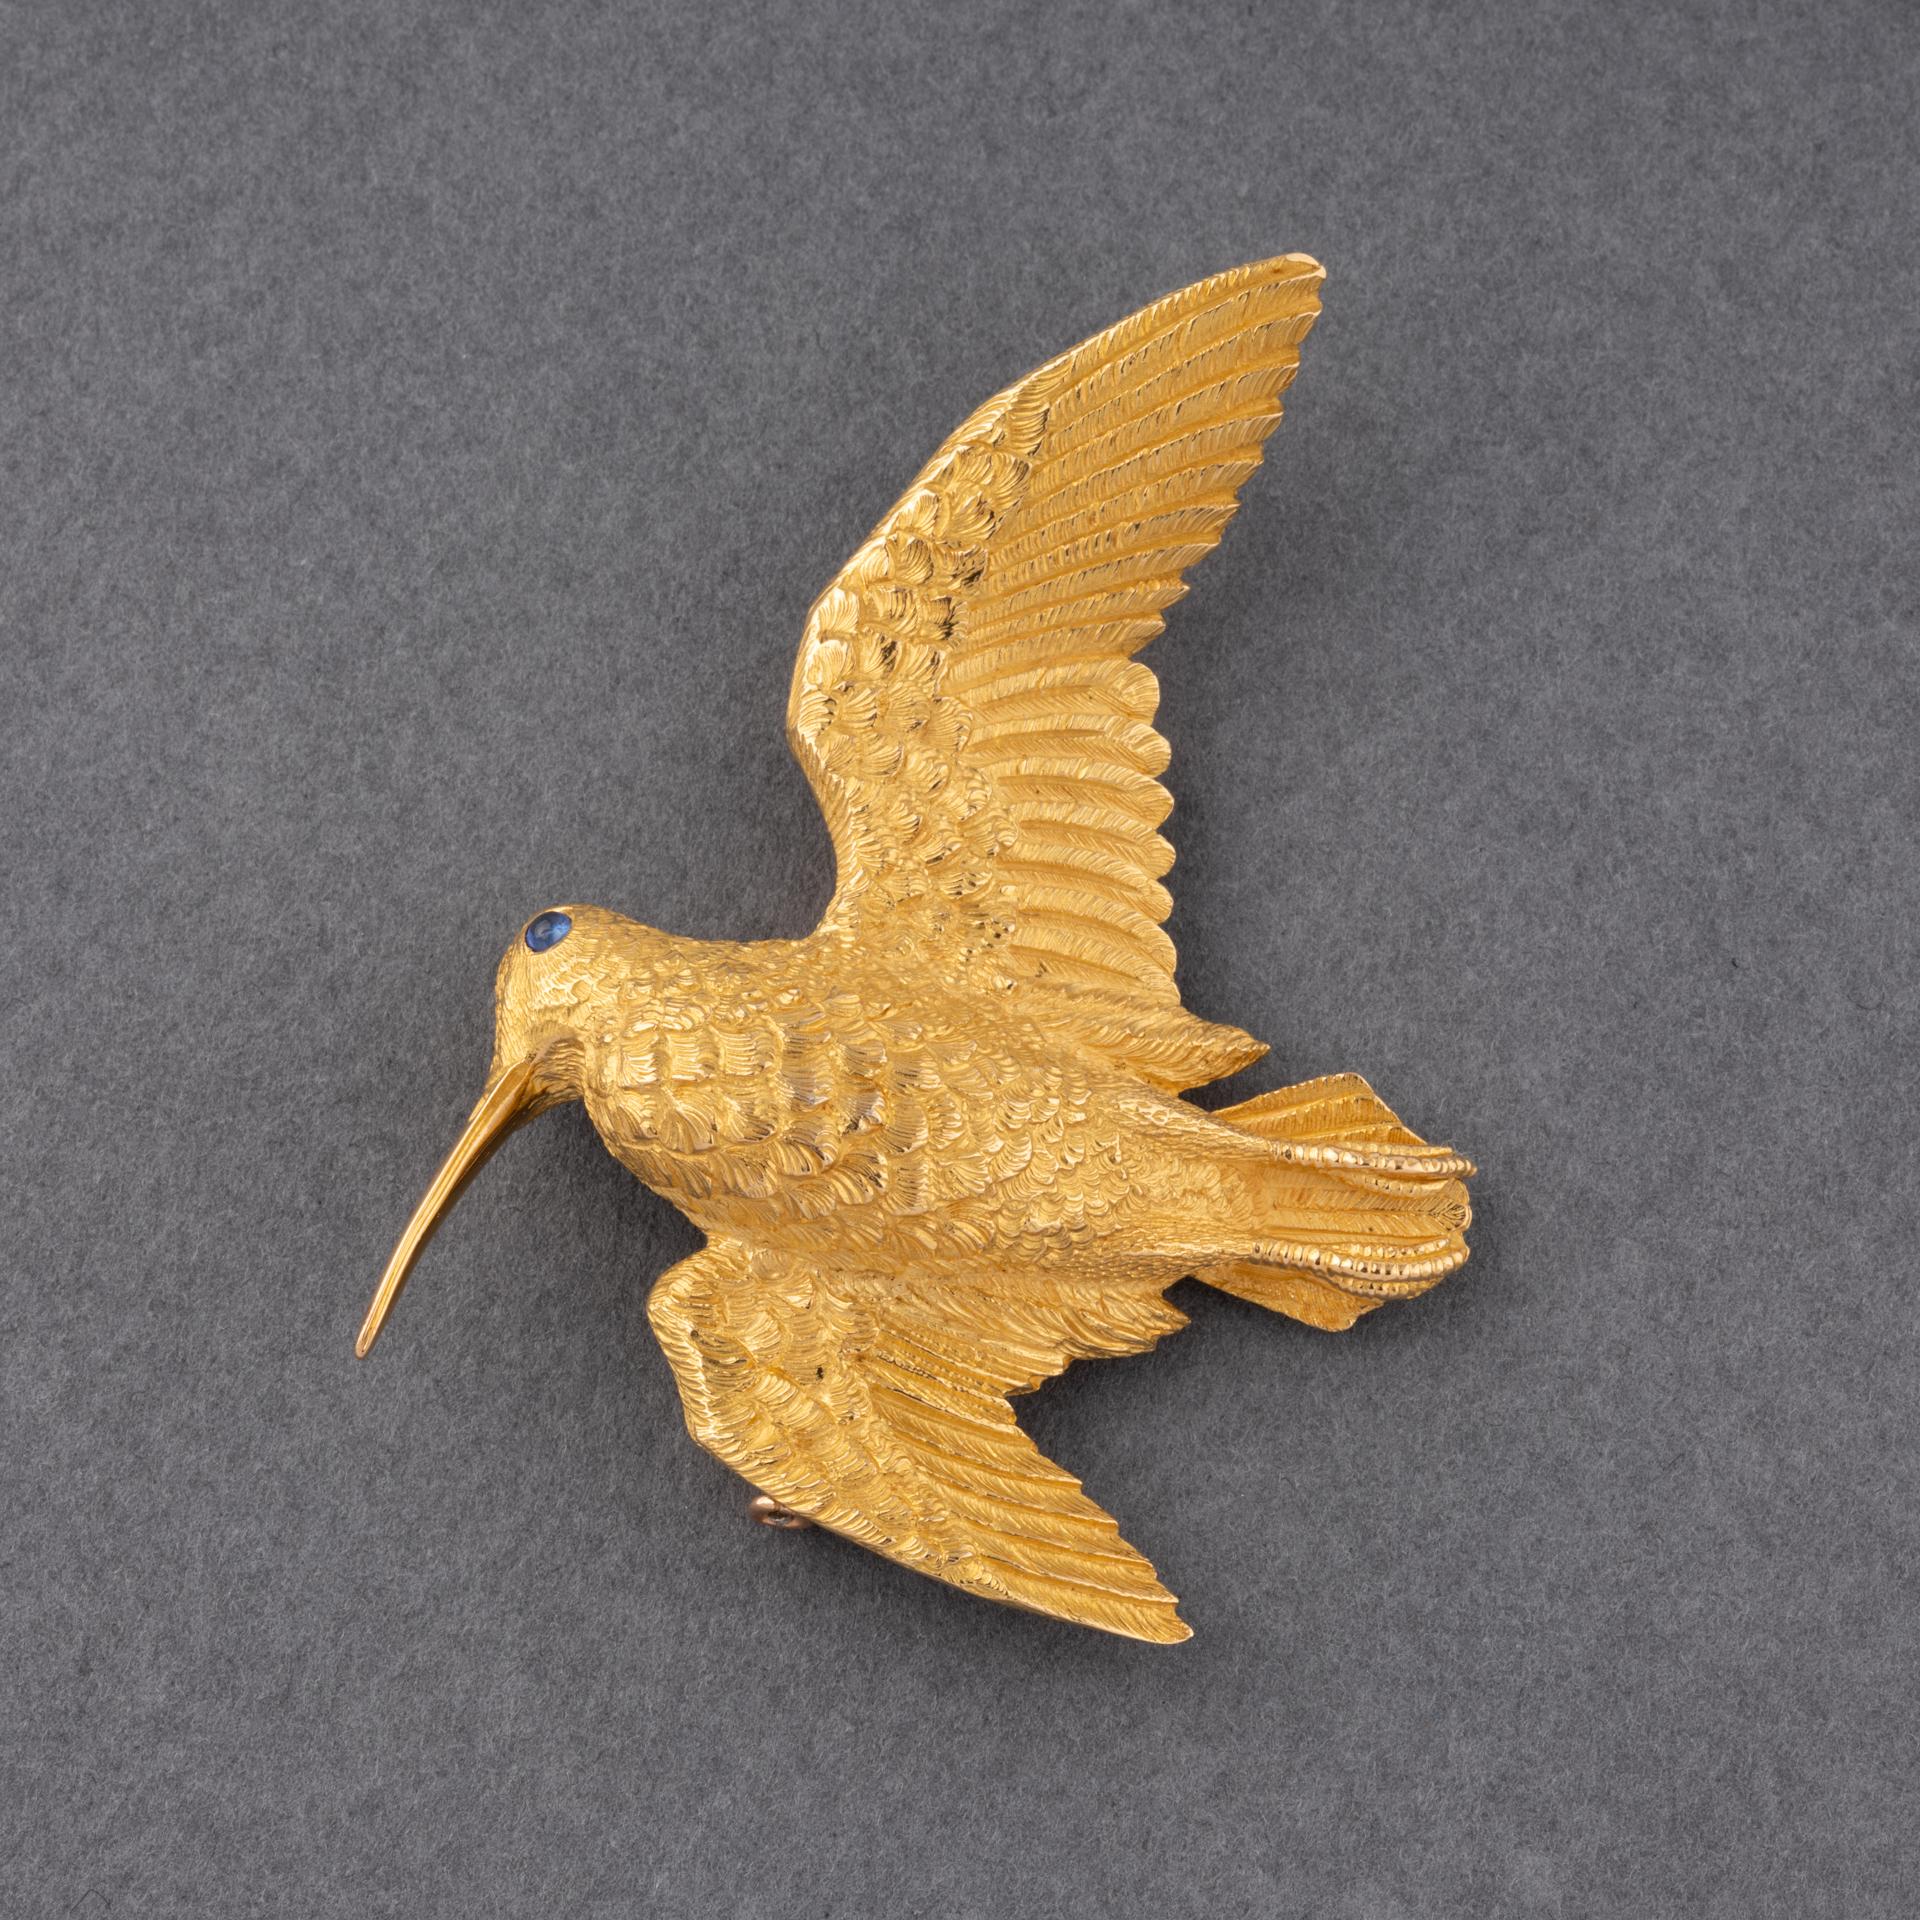 A very lovely vintage brooch, signed Hermès with the hallmark of George Lenfant.
Signed Hermès Paris 42321.
Made in yellow gold 18K and set set with a blue stone for the eye. Hallmarks for gold 18: the eagle head.
Dimensions: 58*47mm.
Weight: 24.90